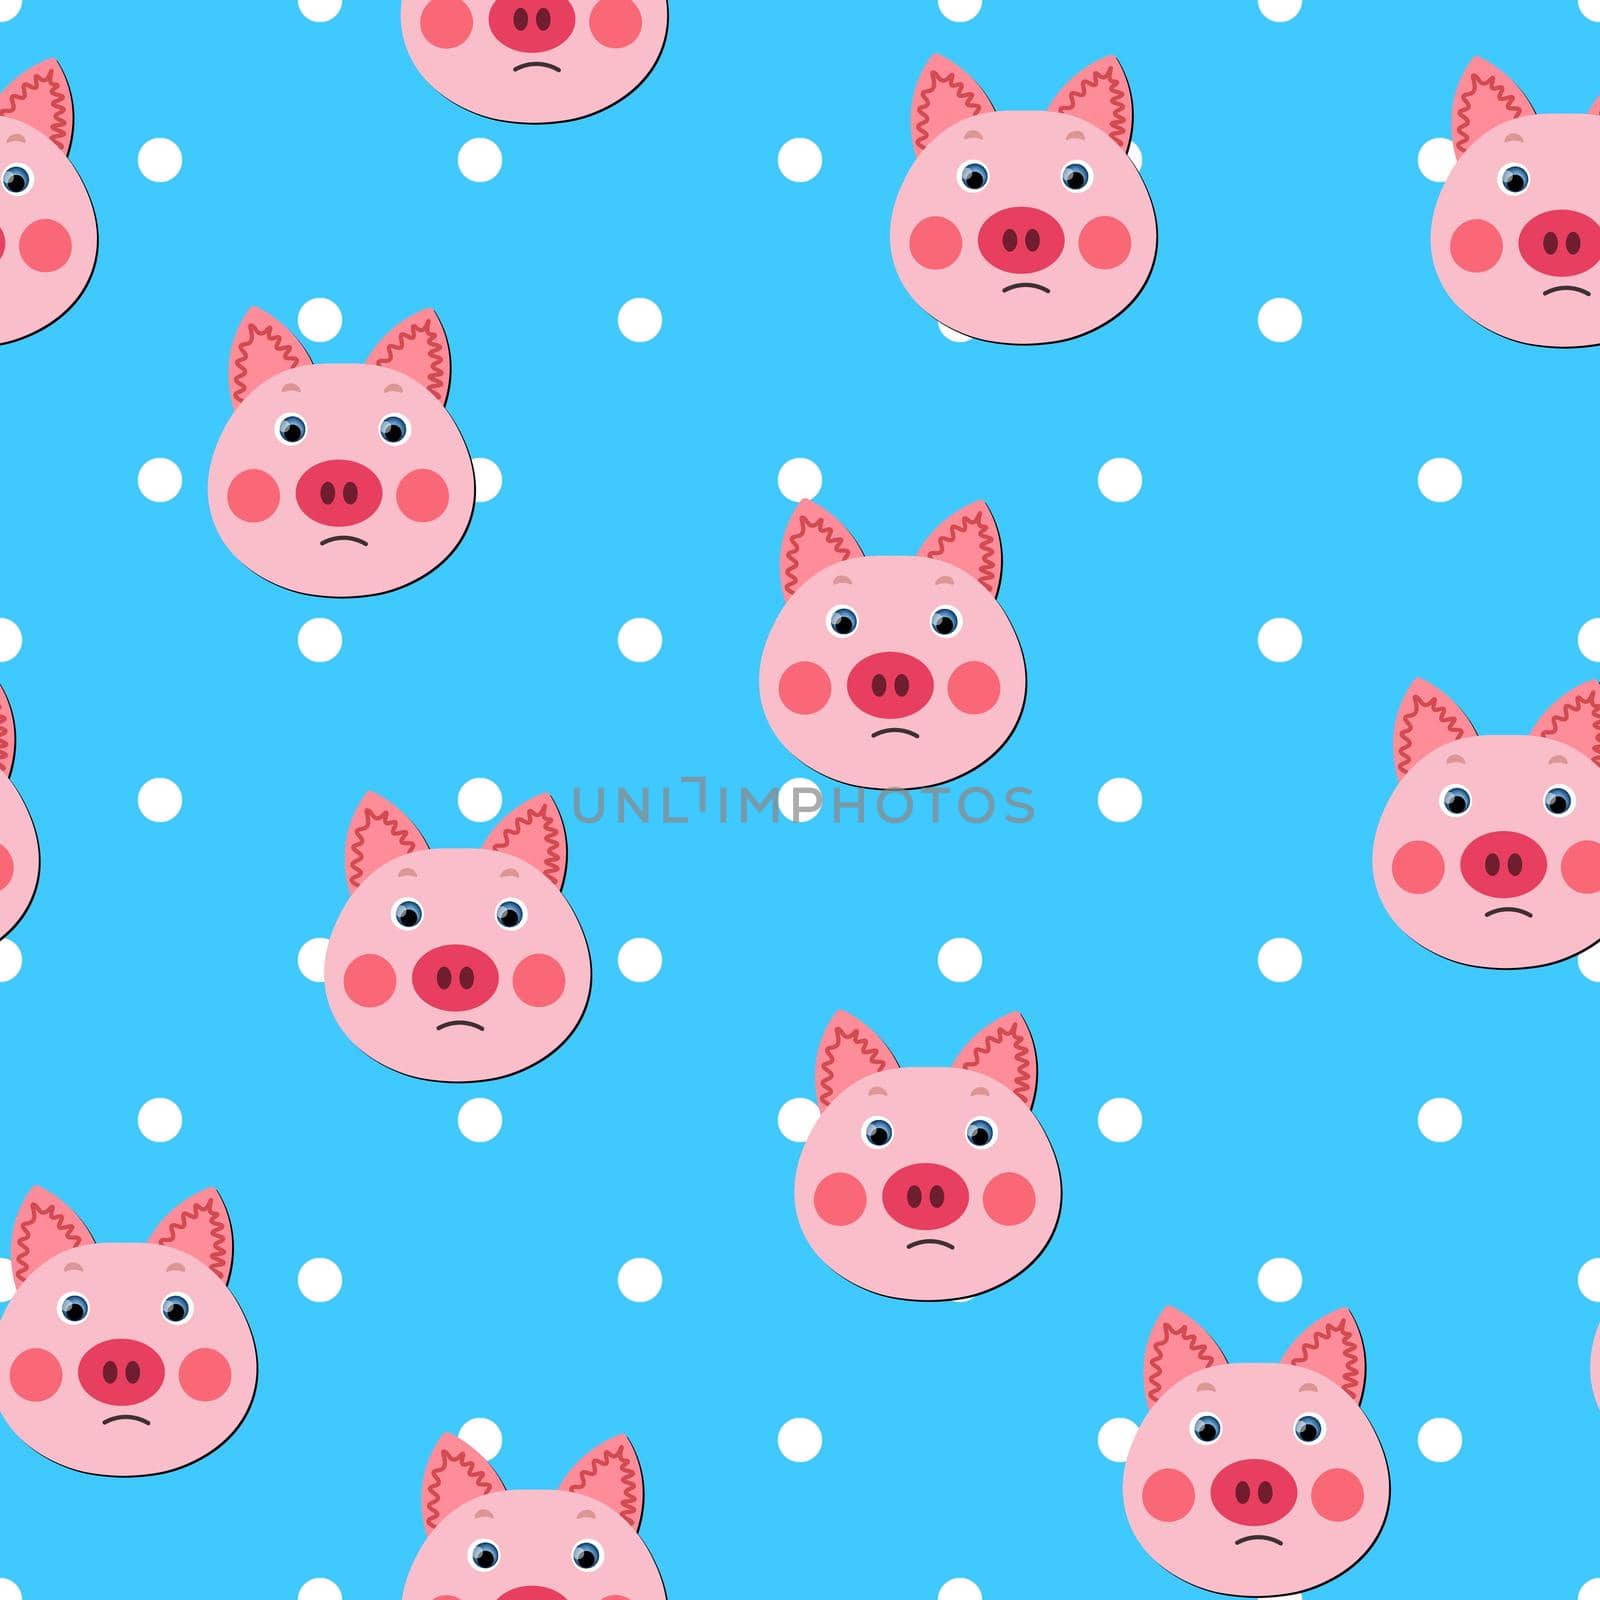 Vector flat animals colorful illustration for kids. Seamless pattern with cute pig face on color polka dots background. Adorable cartoon character. Design for textures, card, poster, fabric, textile.